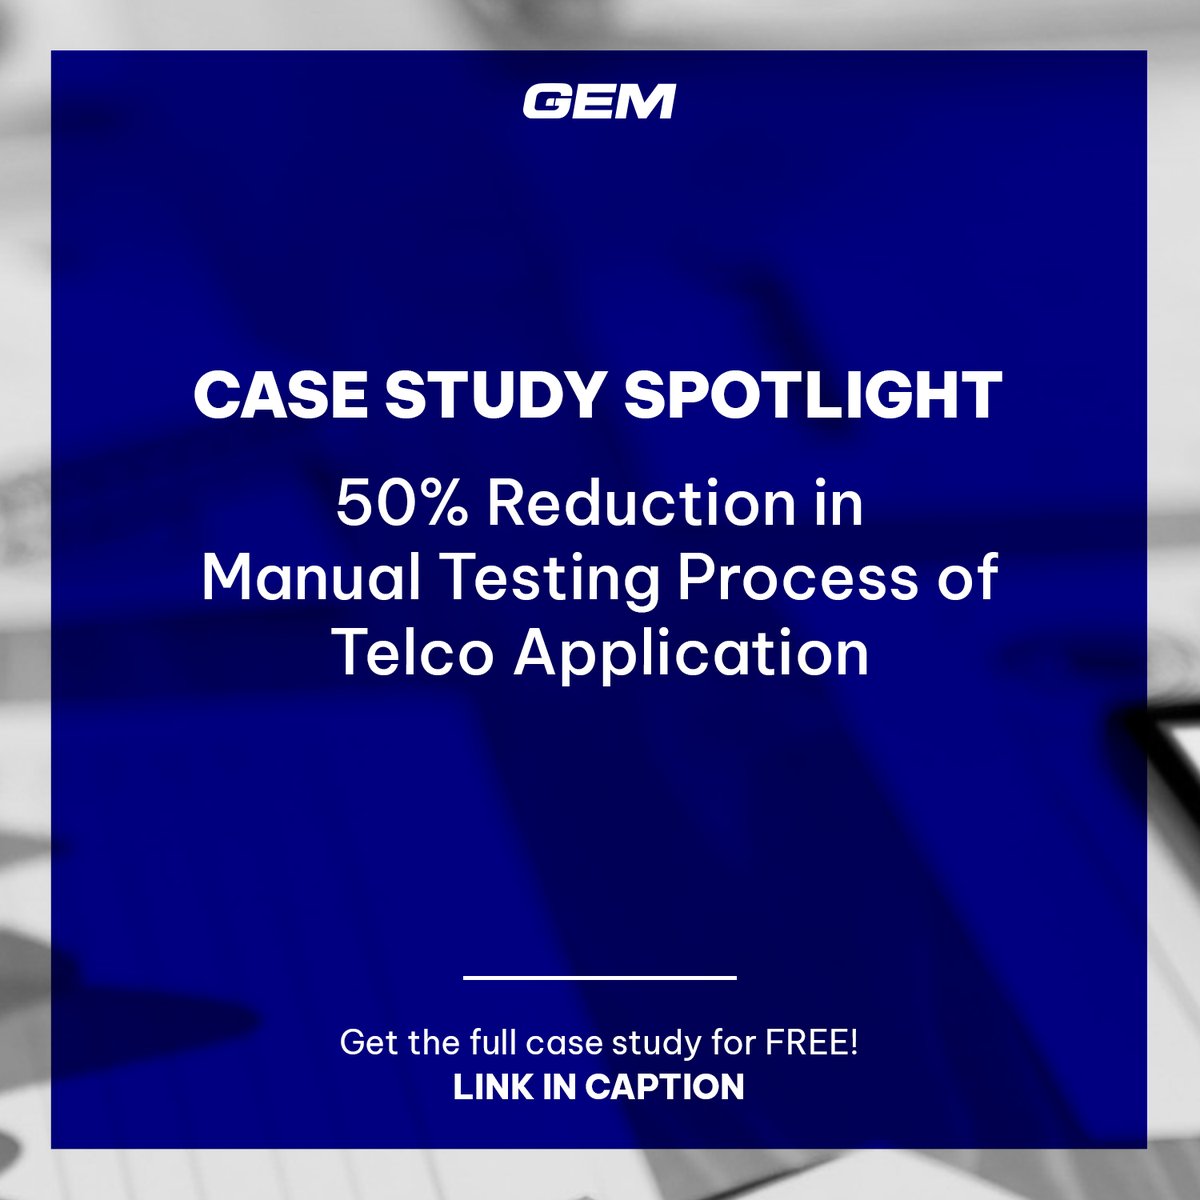 📌 #Manualtesting can be overwhelmed by the volume of required tests. #Automatedtesting streamlines verification, enabling timely releases while maintaining quality.
❓ Curious about how we solve this client’s problems? 👉 Get the full case study for FREE: shorturl.at/dsER7